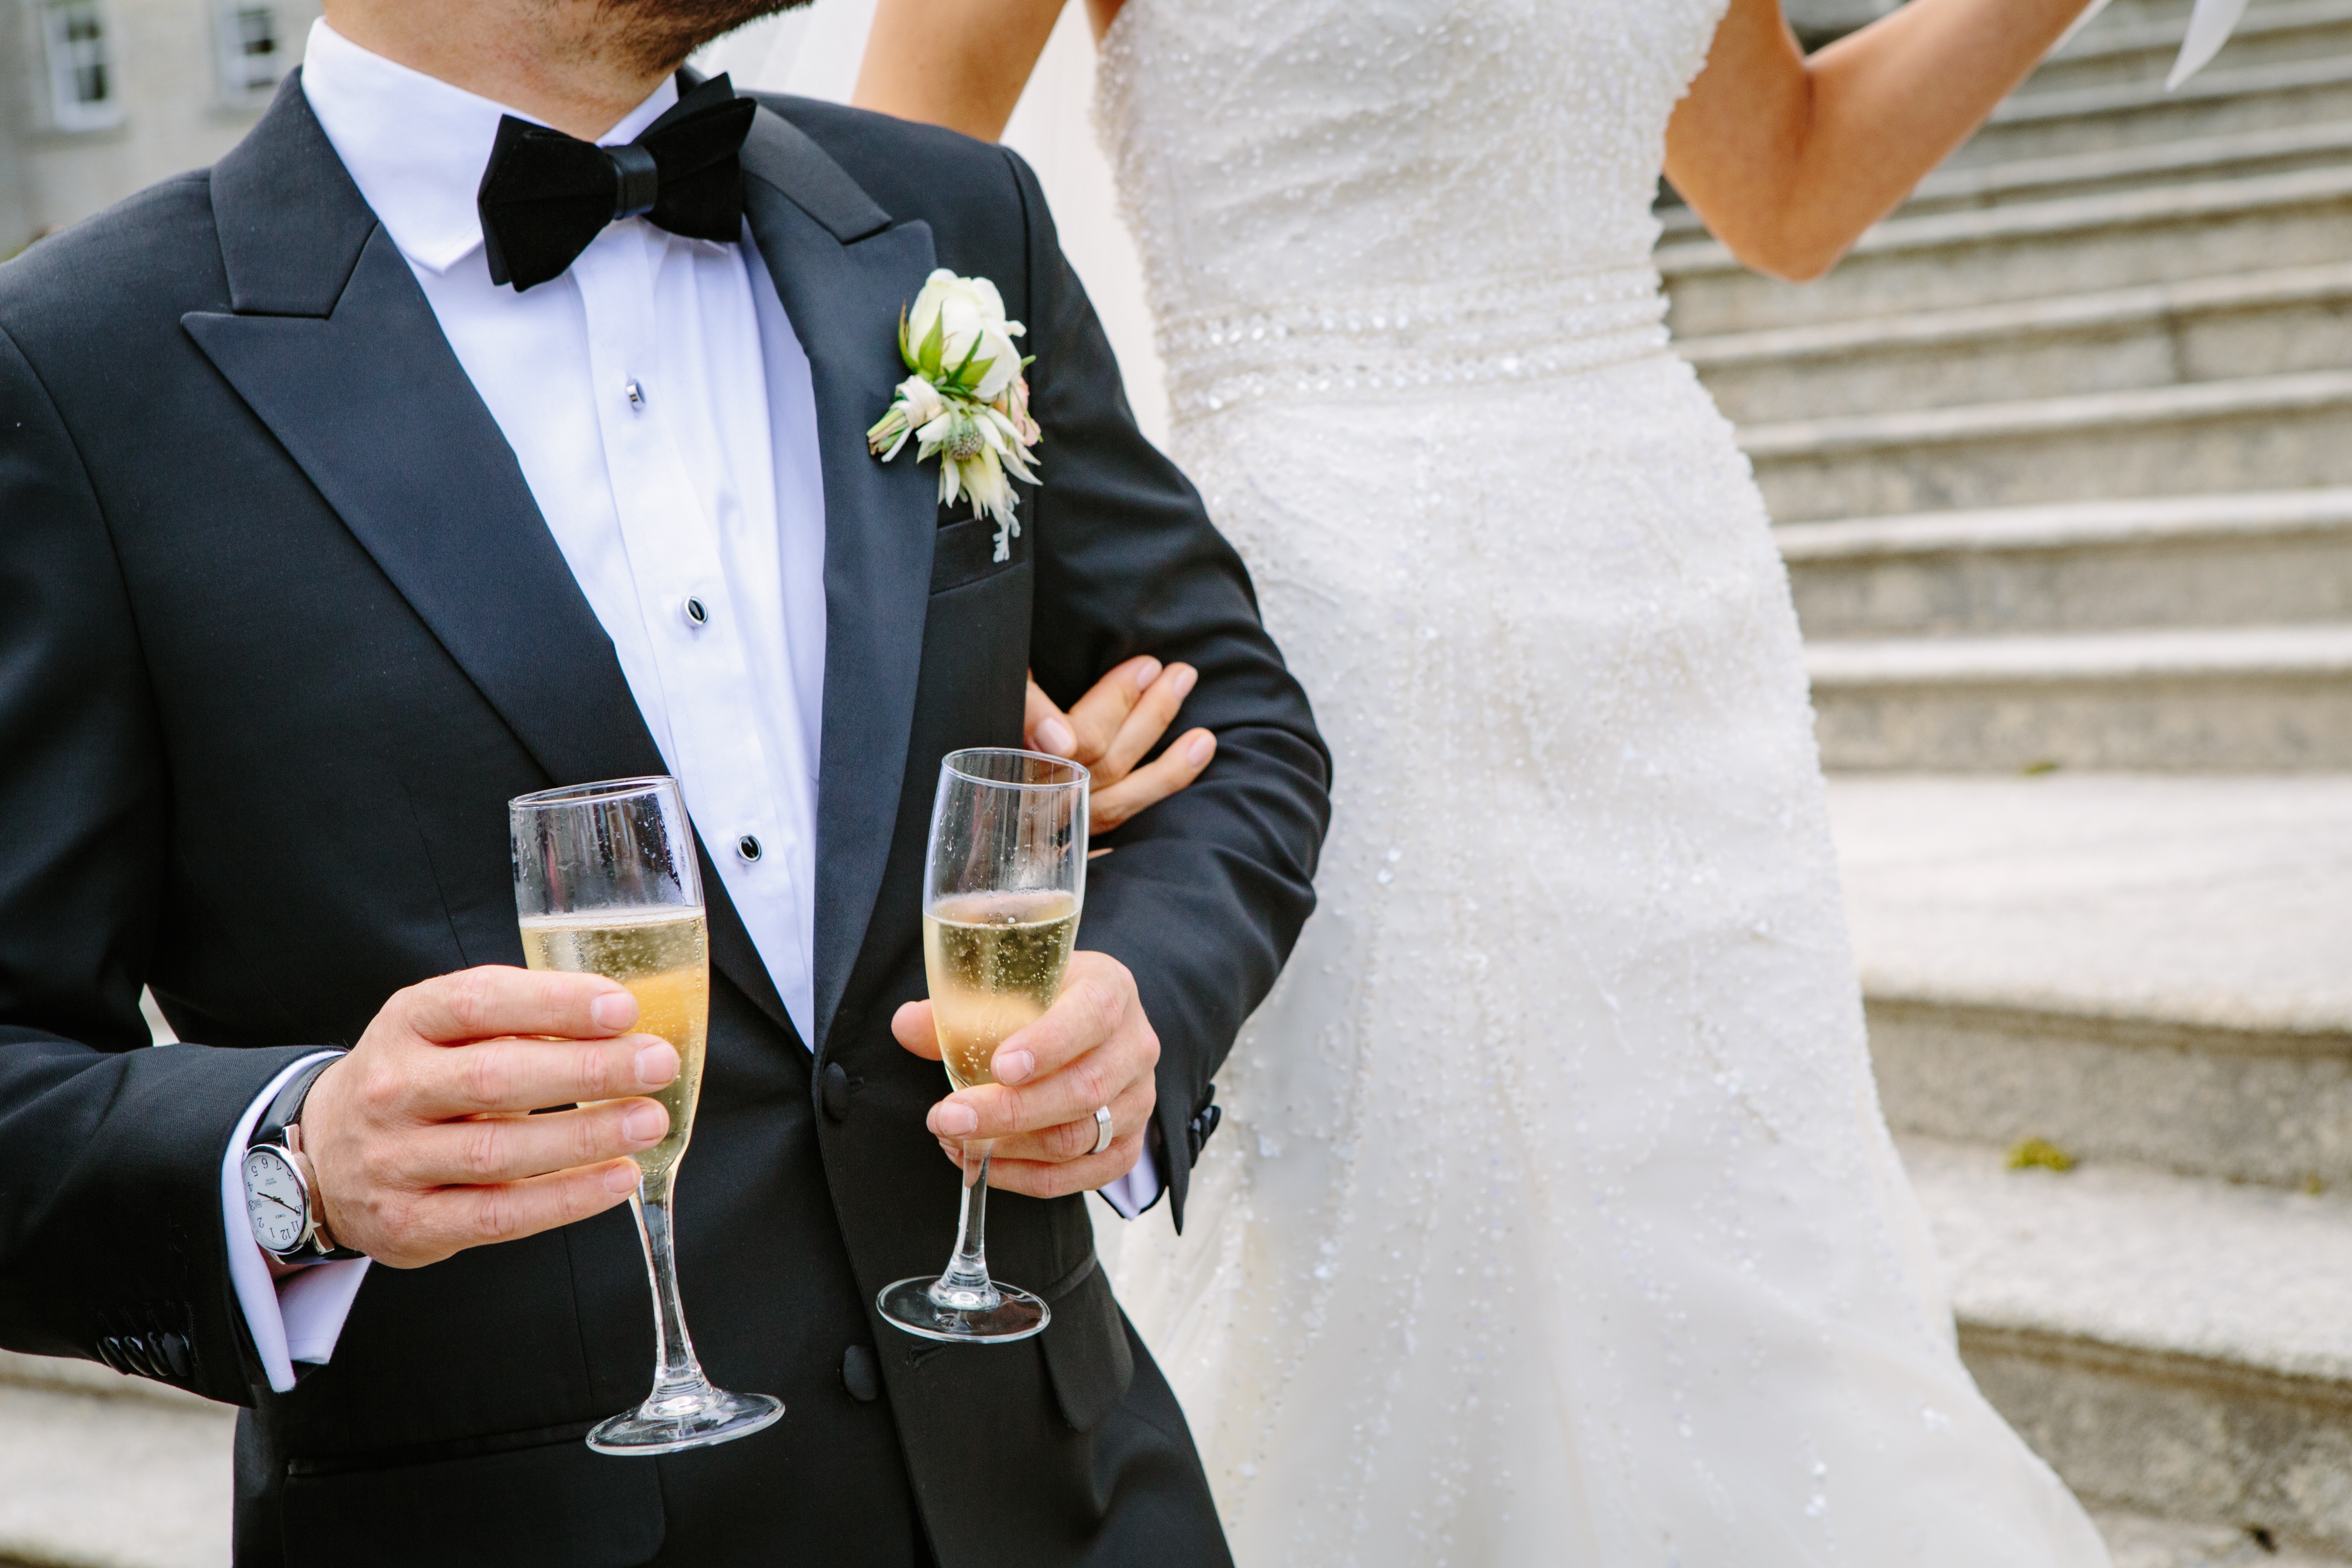 Should You Have a Child-Free Wedding? 6 Things to Consider